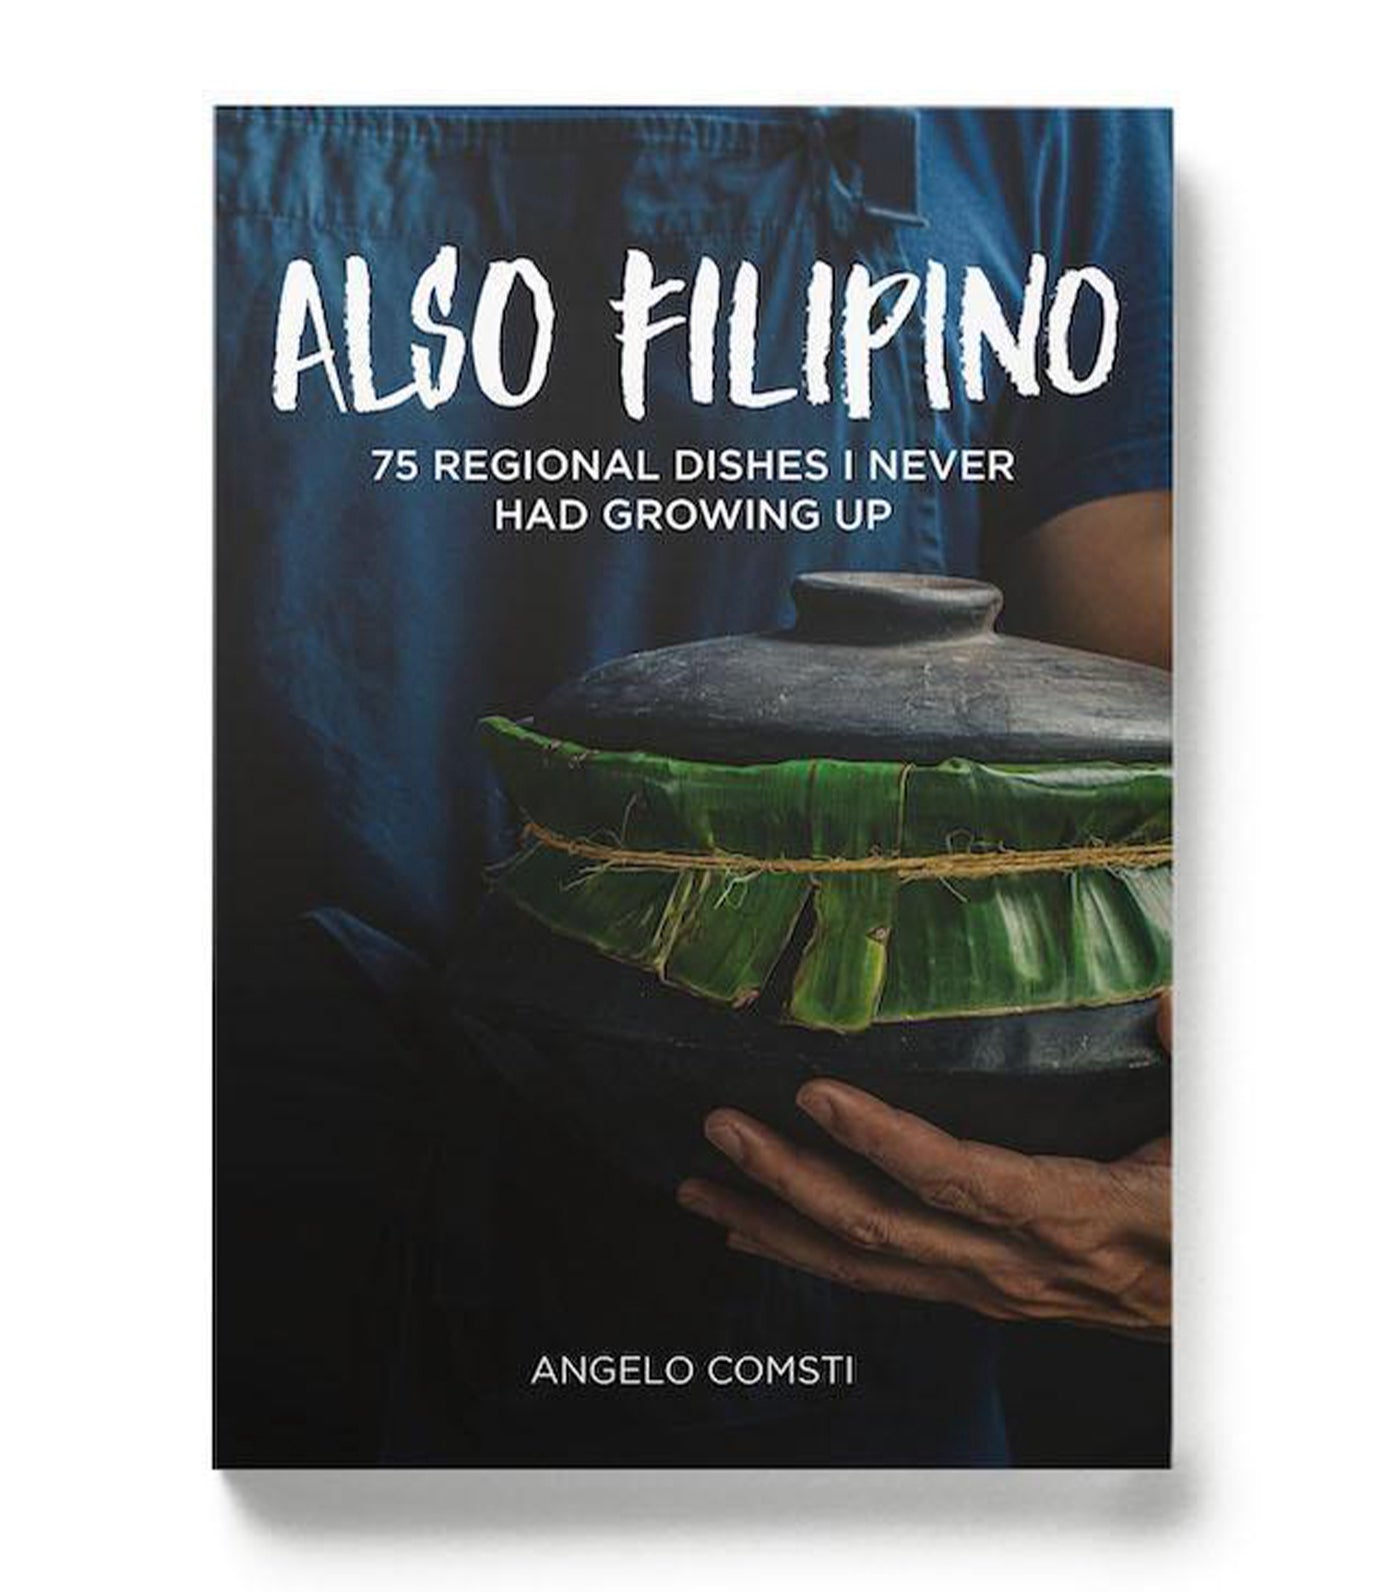 Also Filipino: 75 Regional Dishes I Never Had Growing Up by Angelo Comsti